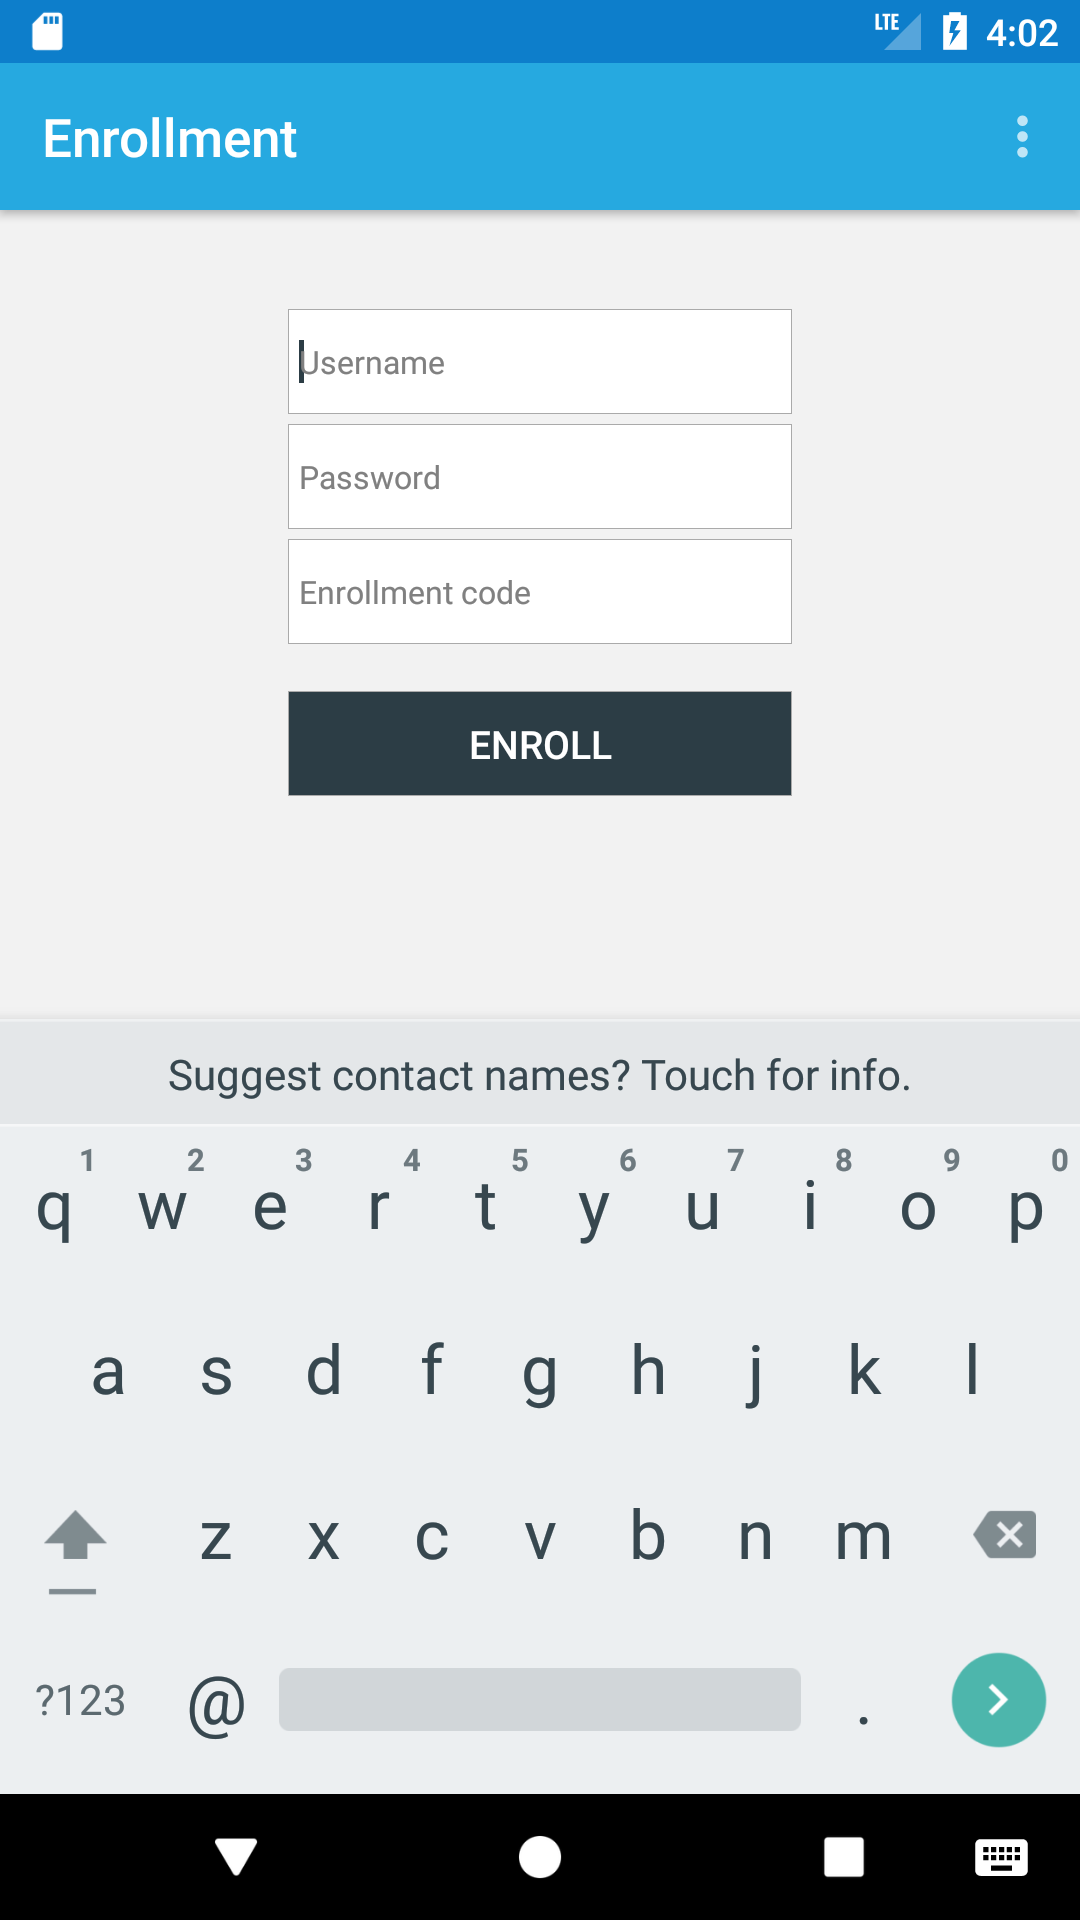 Android enrollment view